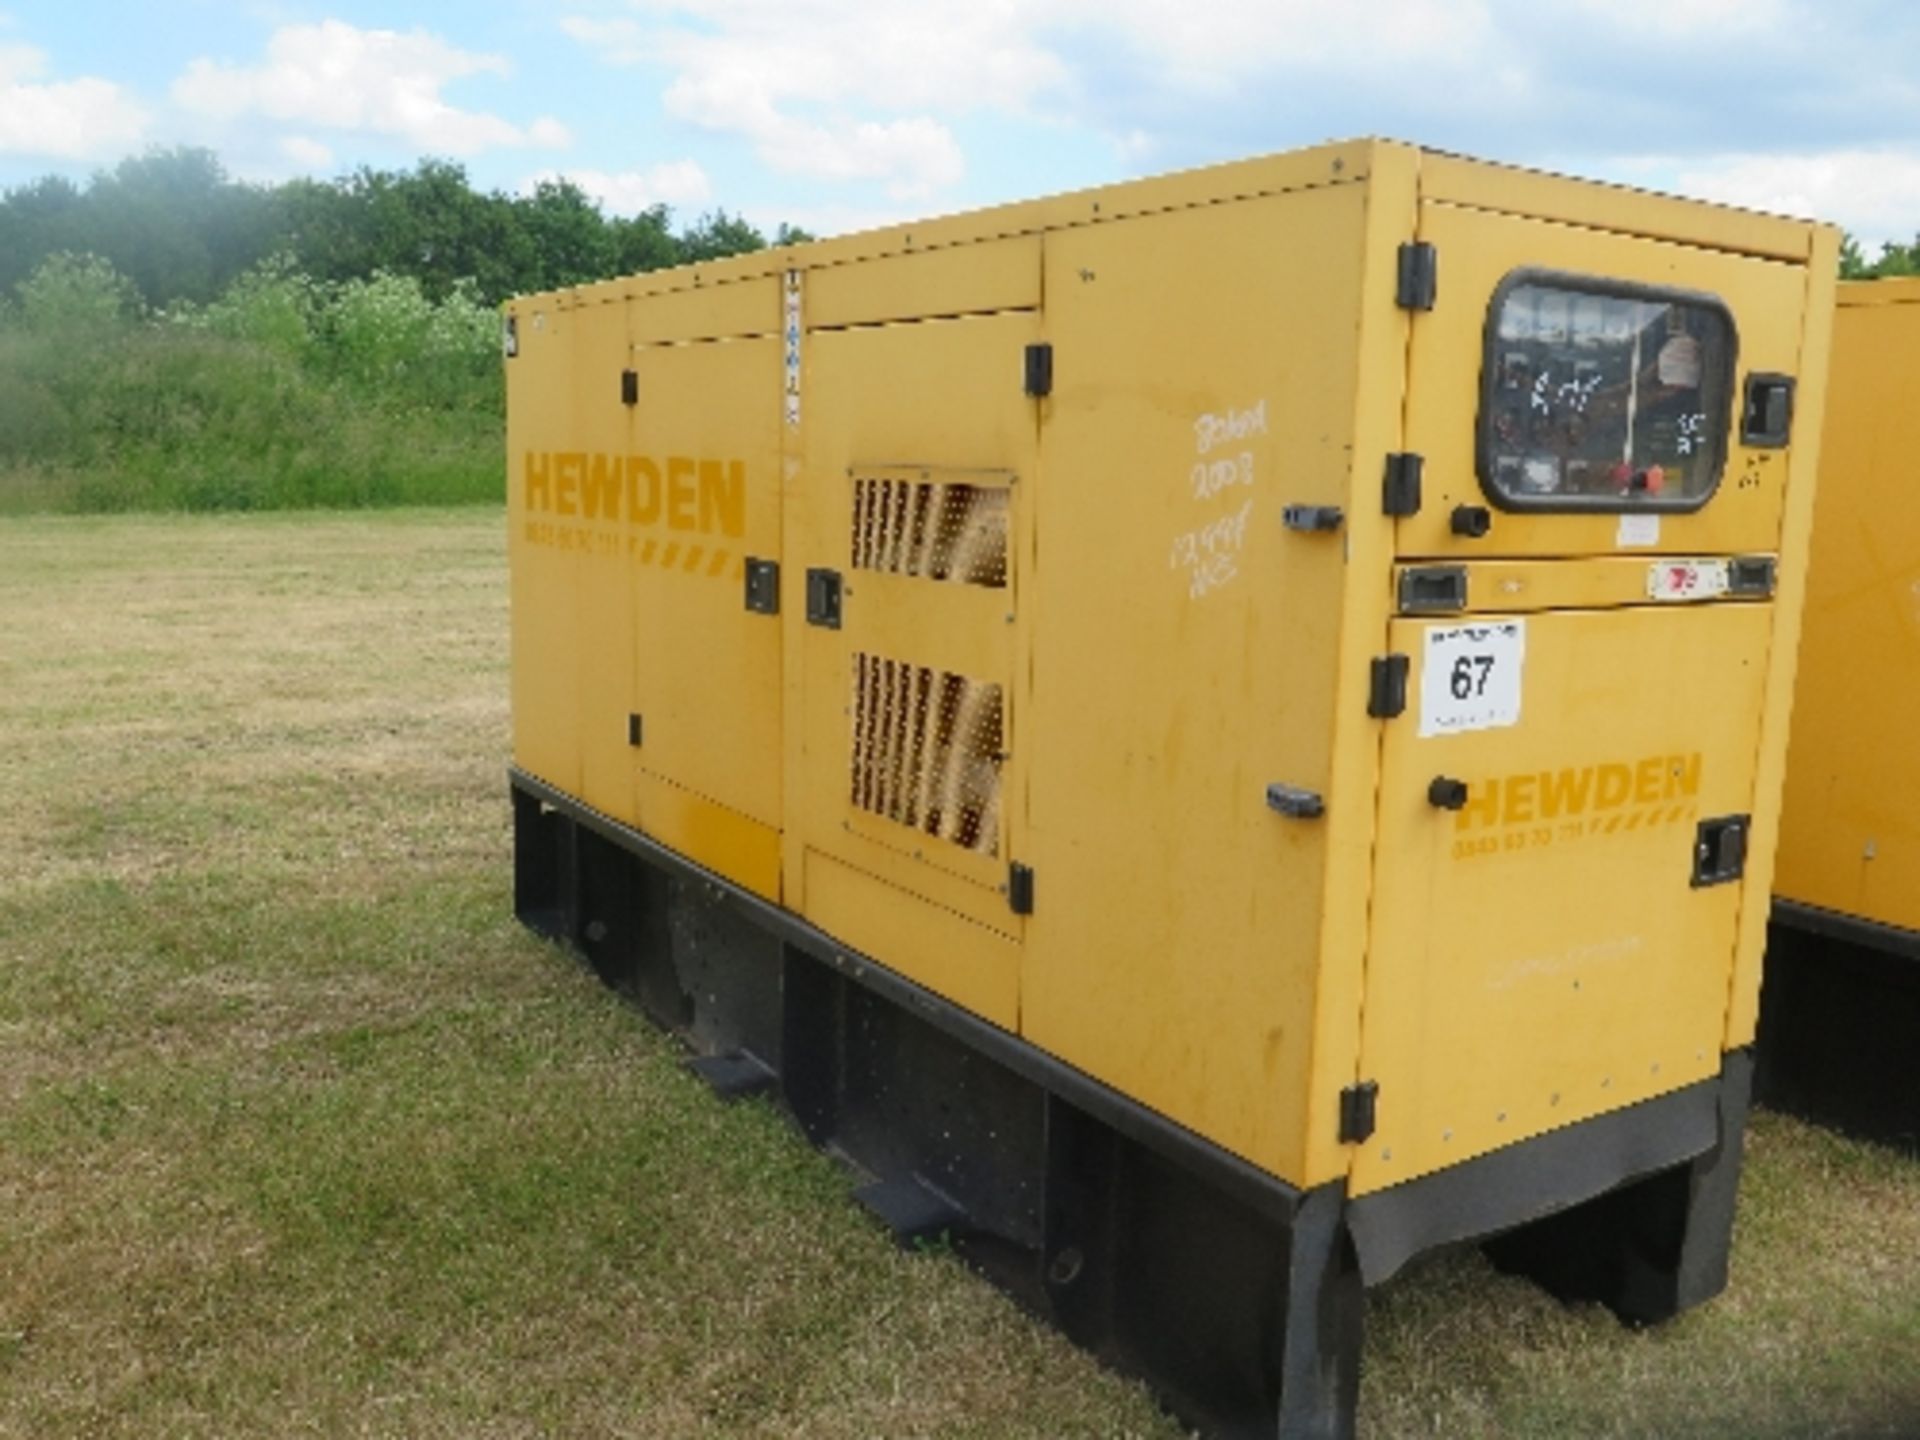 Caterpillar XQE80 generator 12997 hrs 5003857
PERKINS POWER - RUNS AND MAKES POWER
ALL LOTS are